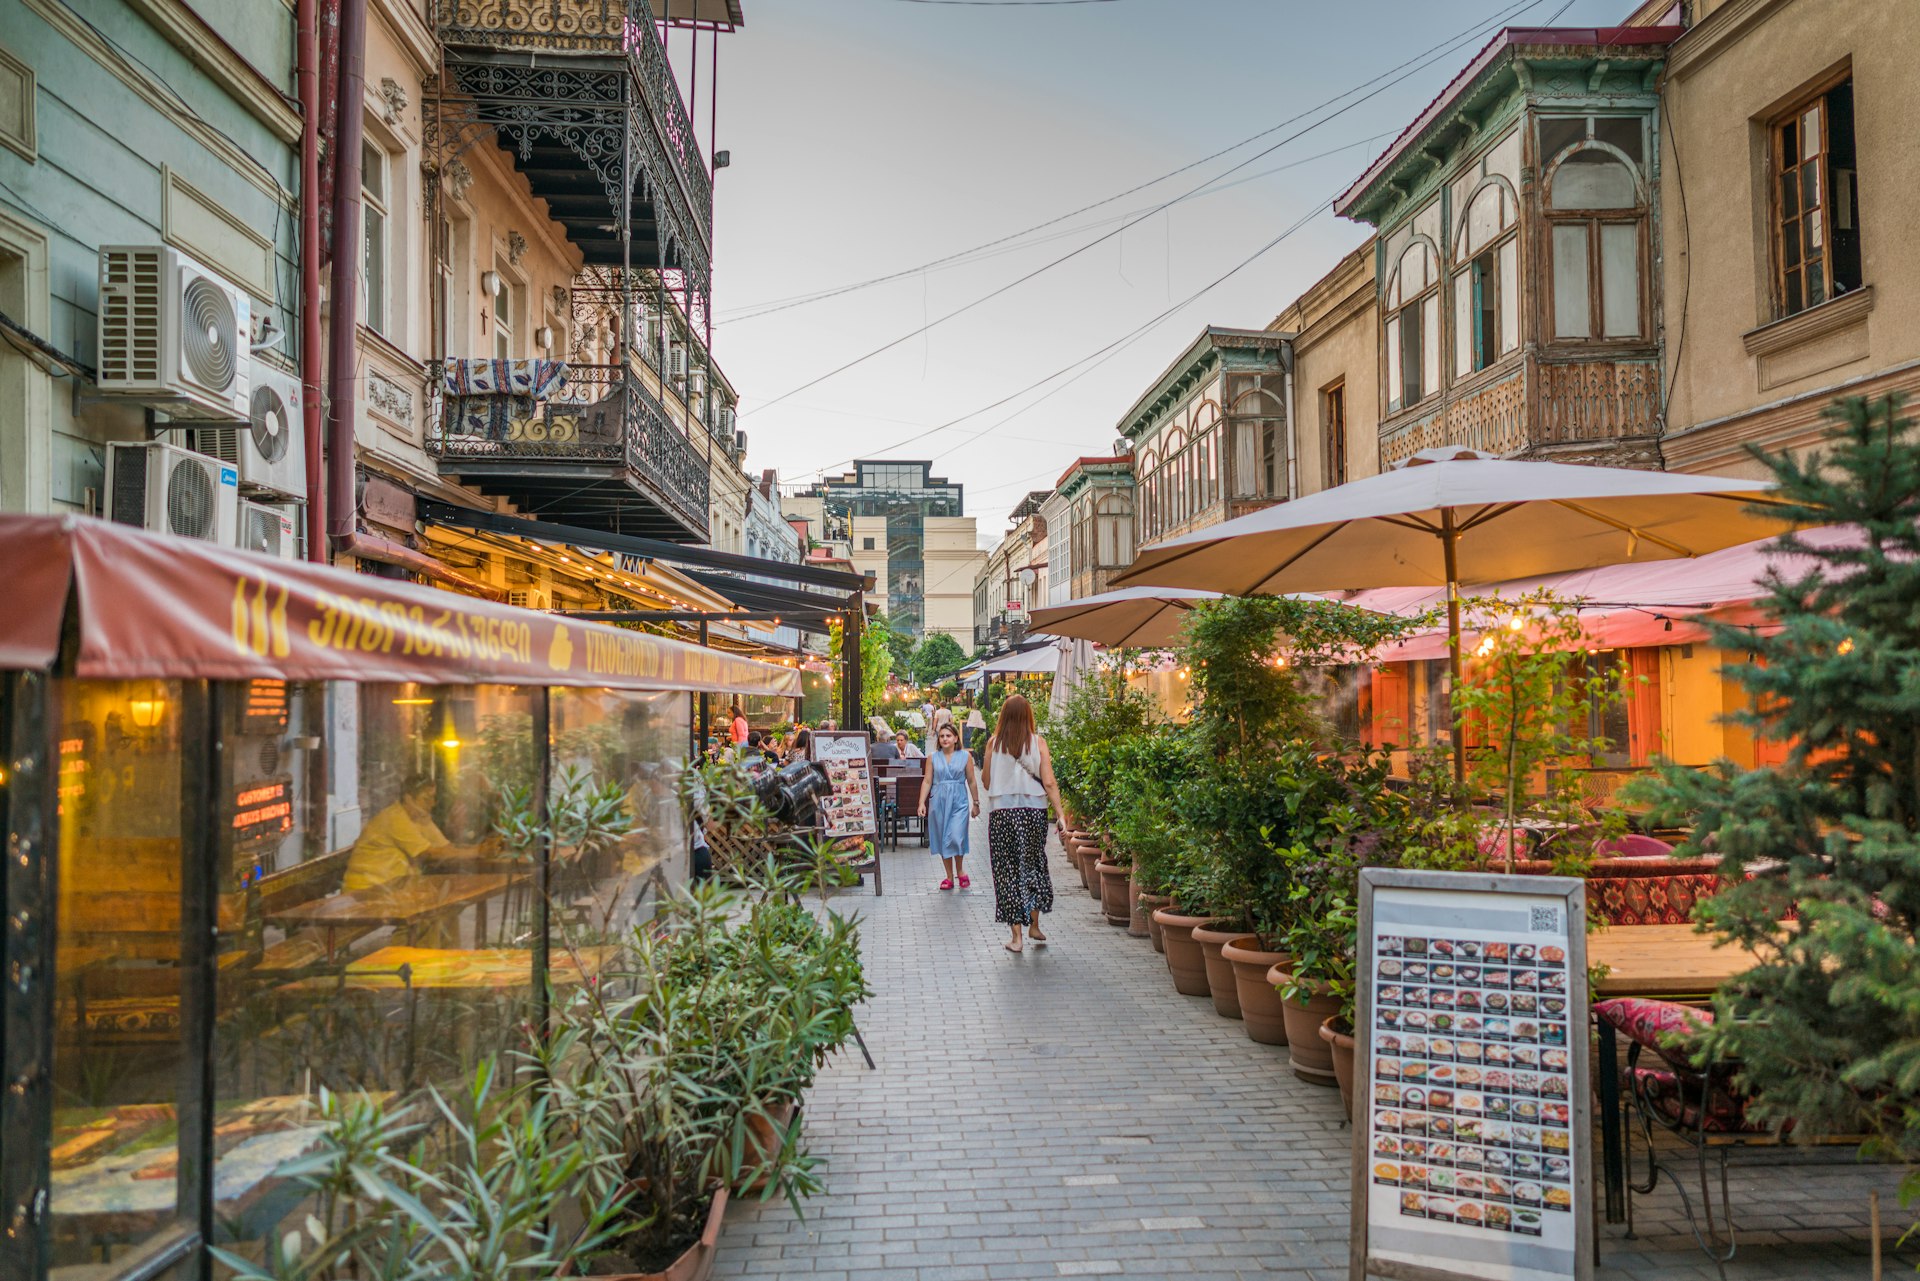 A narrow street lined with bars and restaurants, with tables on the sidewalk, in Tbilisi, Georgia